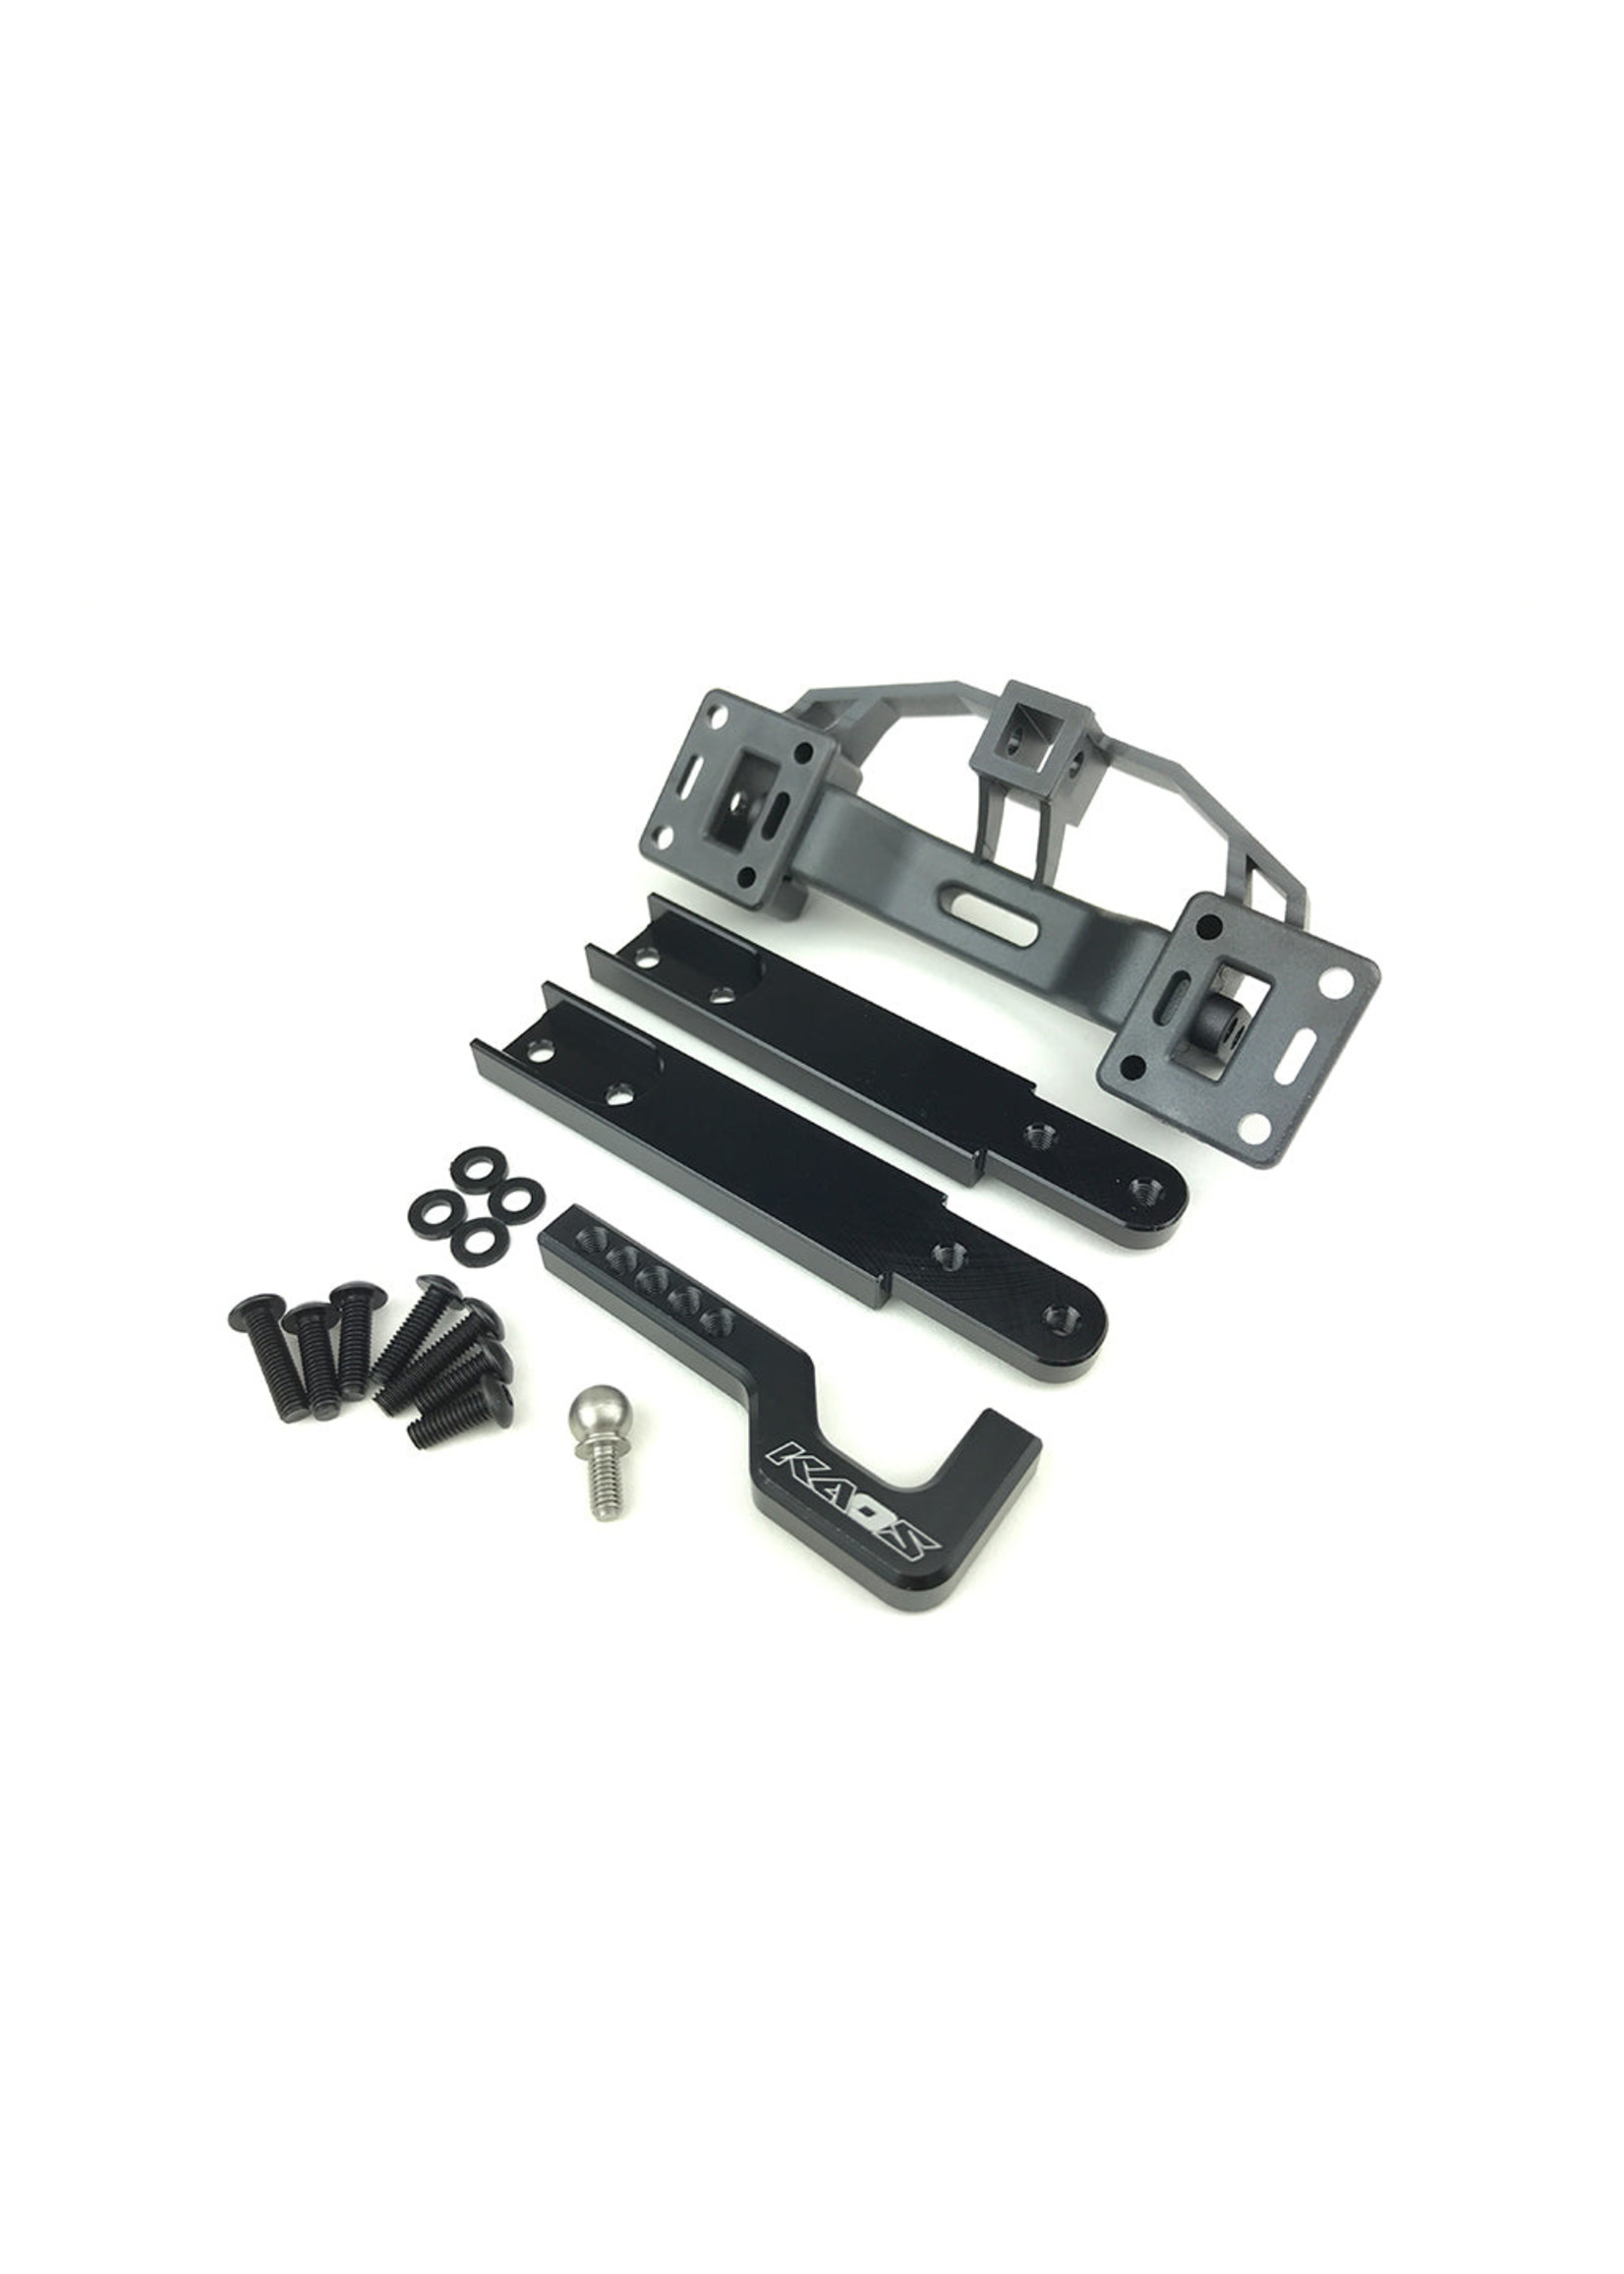 CEN Racing CKD0450 Aluminum Tow Hitch, Ford F450 SD